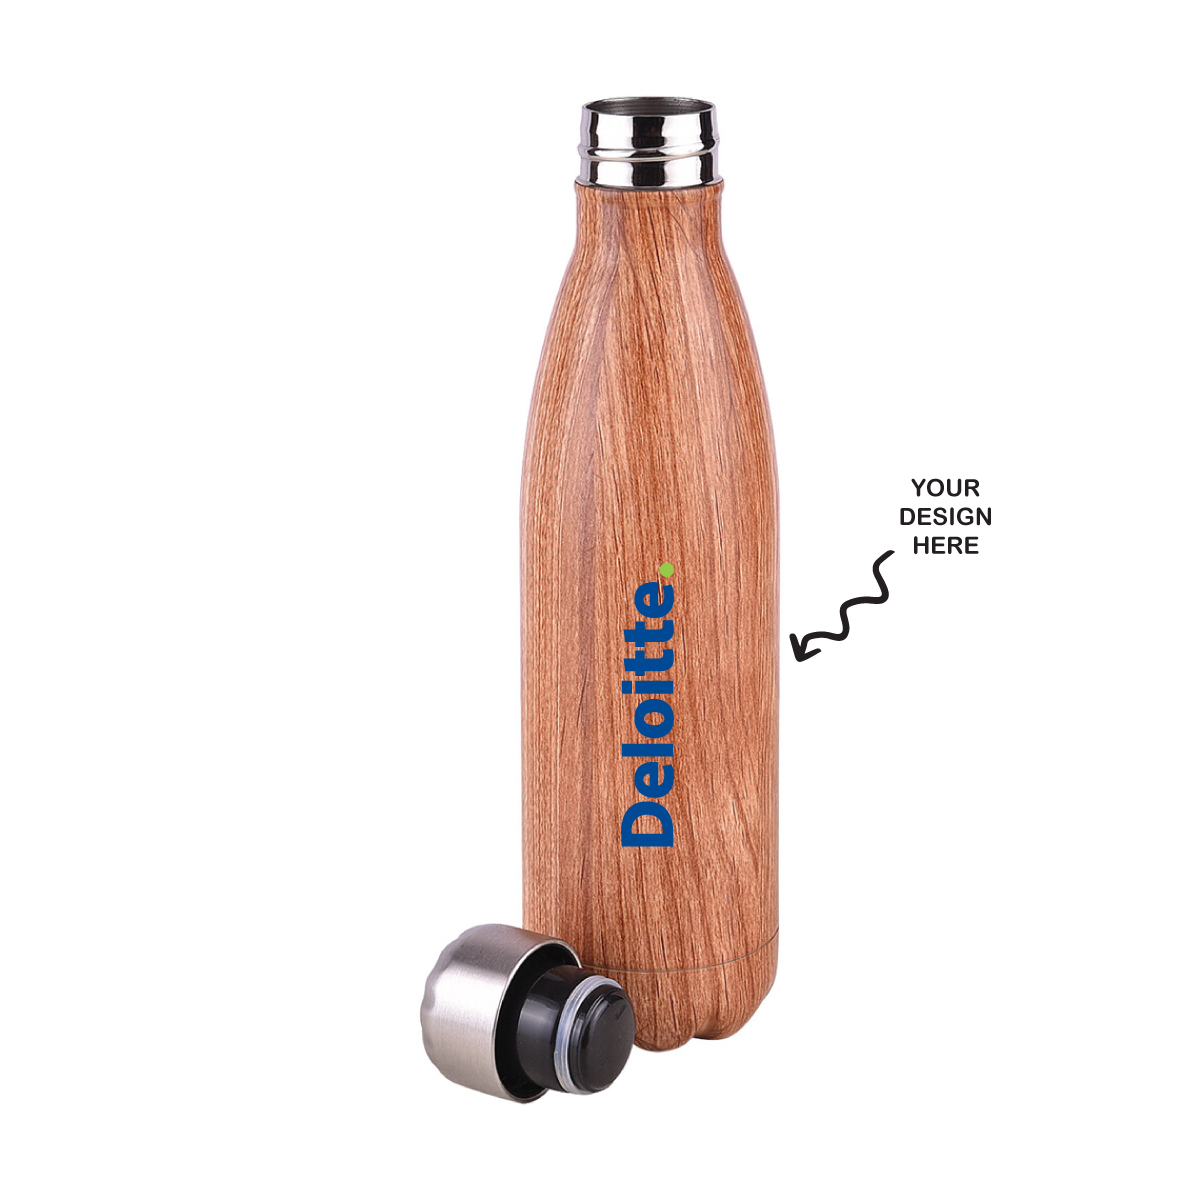 Personalized Hot and Cold Sports Bottle Wooden Finish - For Return Gift, Corporate Gifting, Office or Personal Use